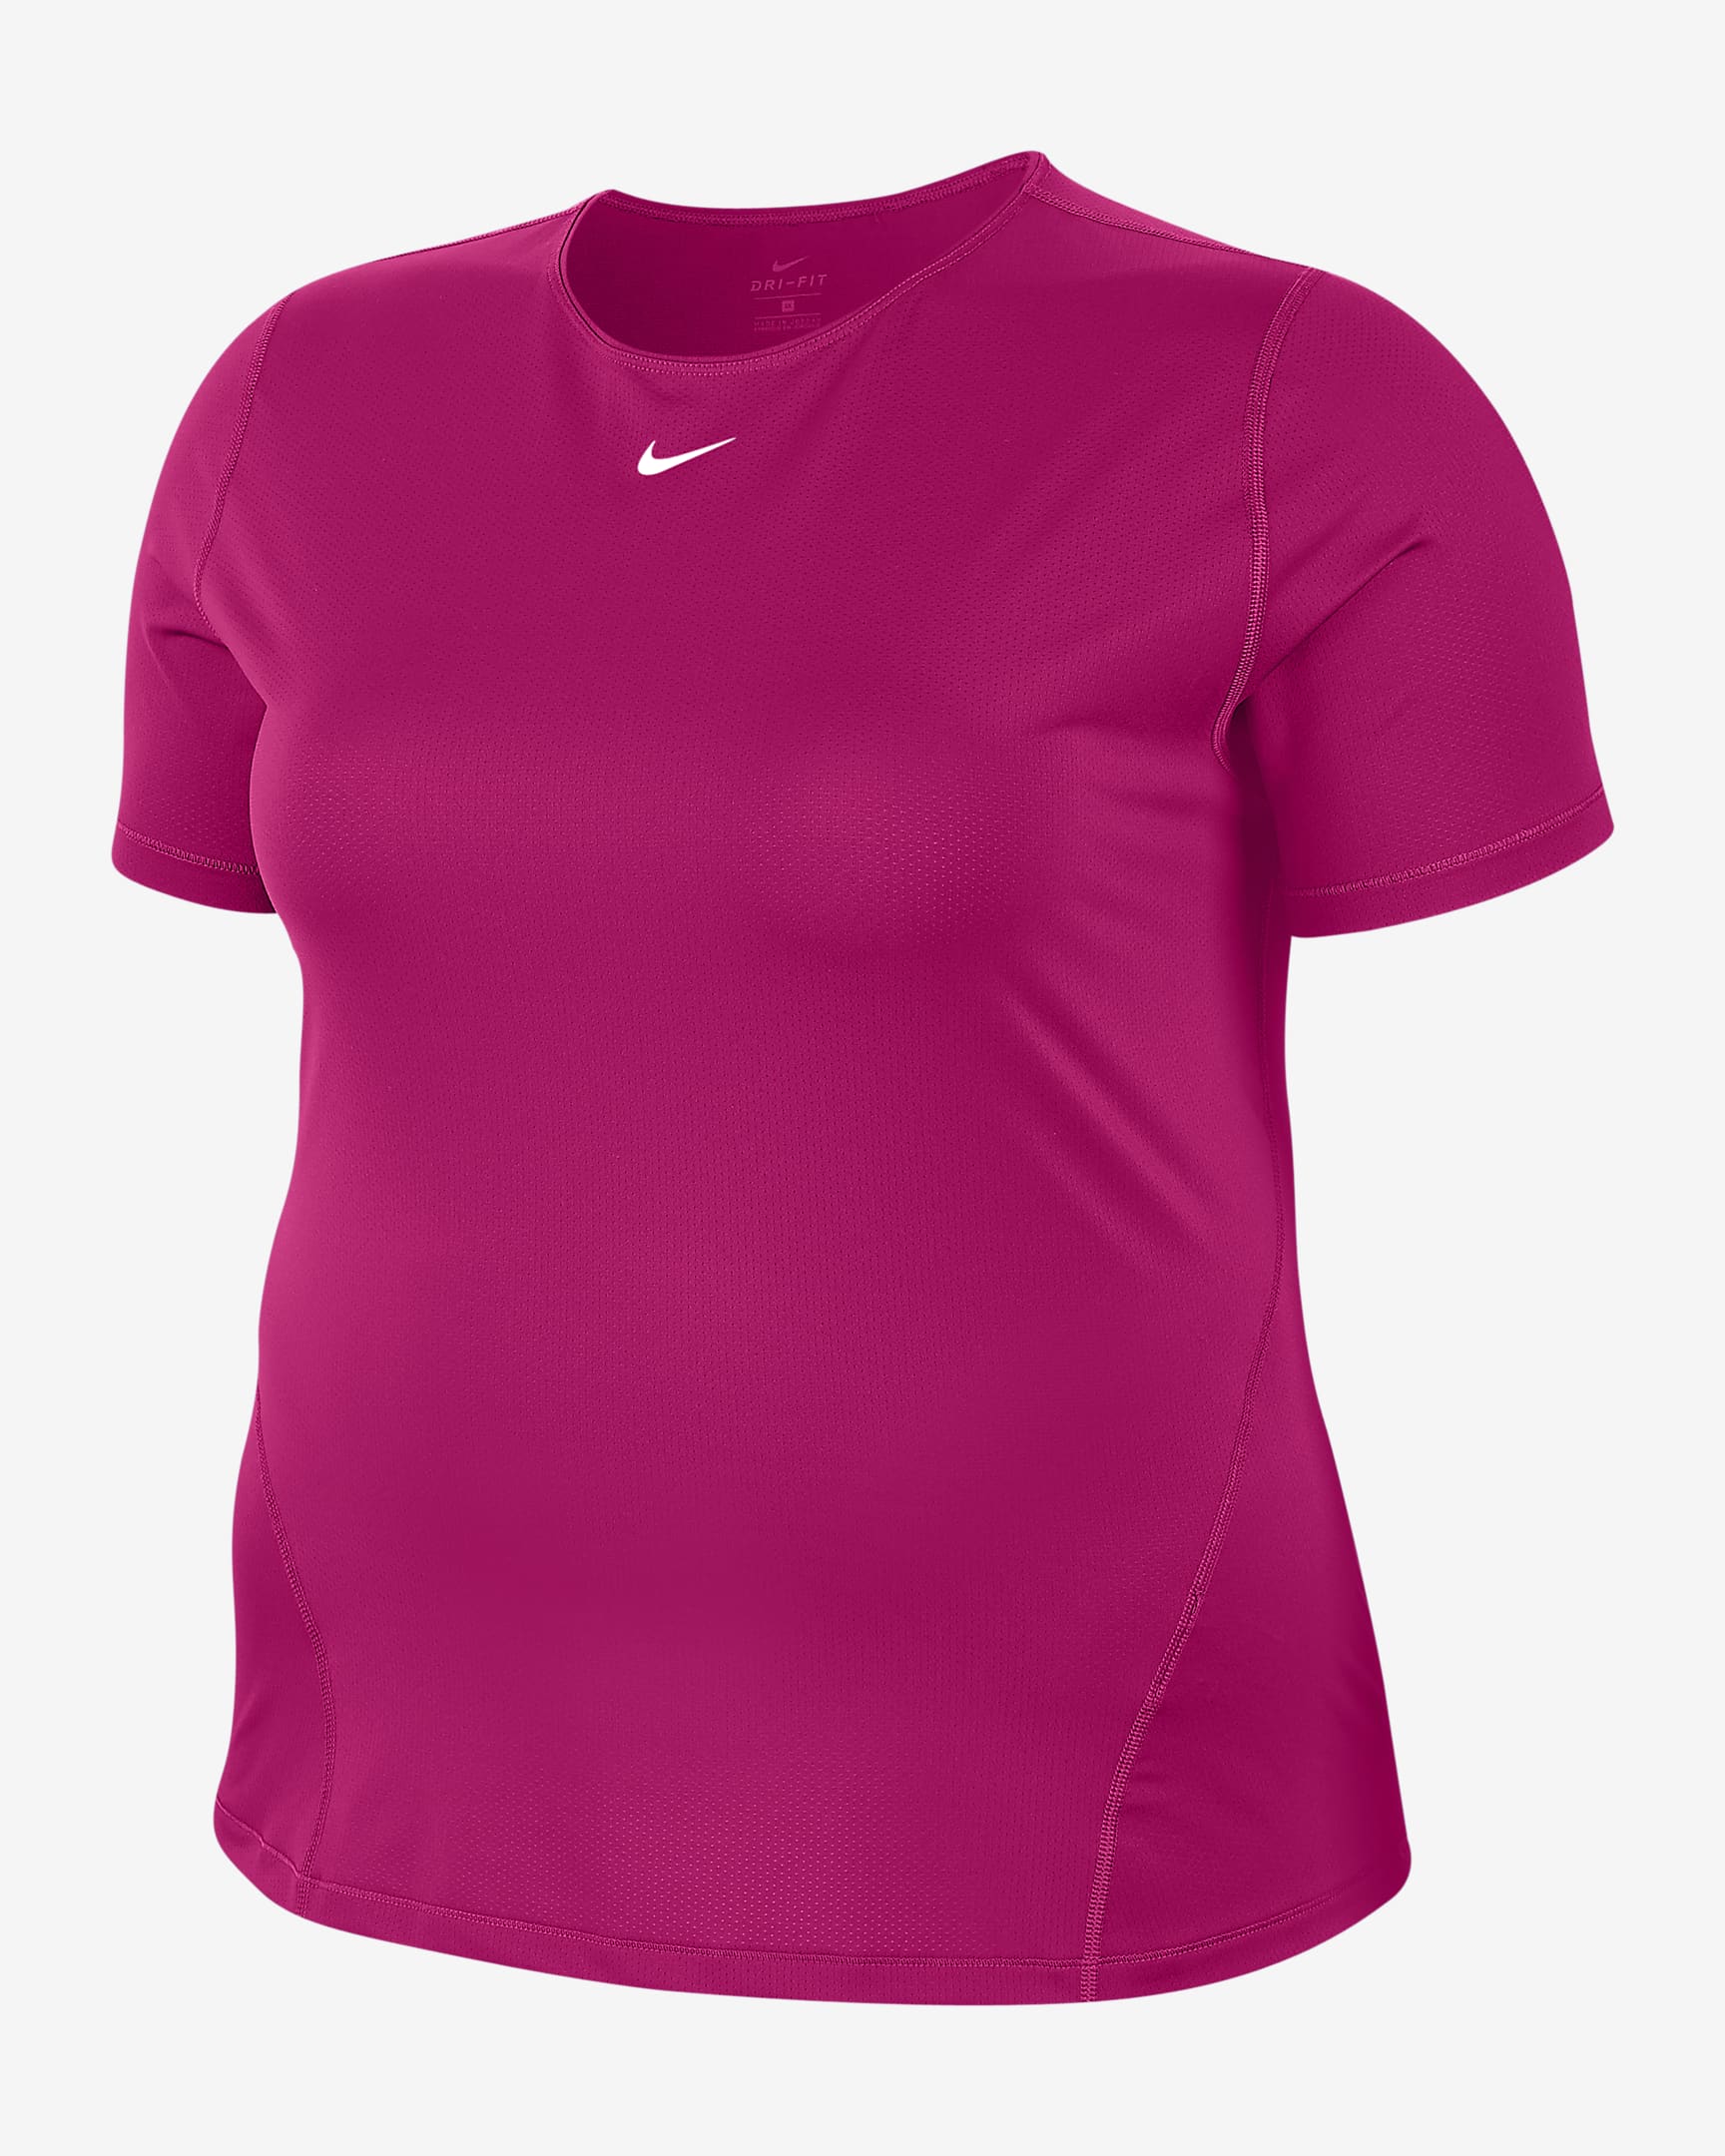 nikes-year-of-the-ox-red-sportswear-as-low-as-70-off-55-for-red-sweatshields-2021-1-29